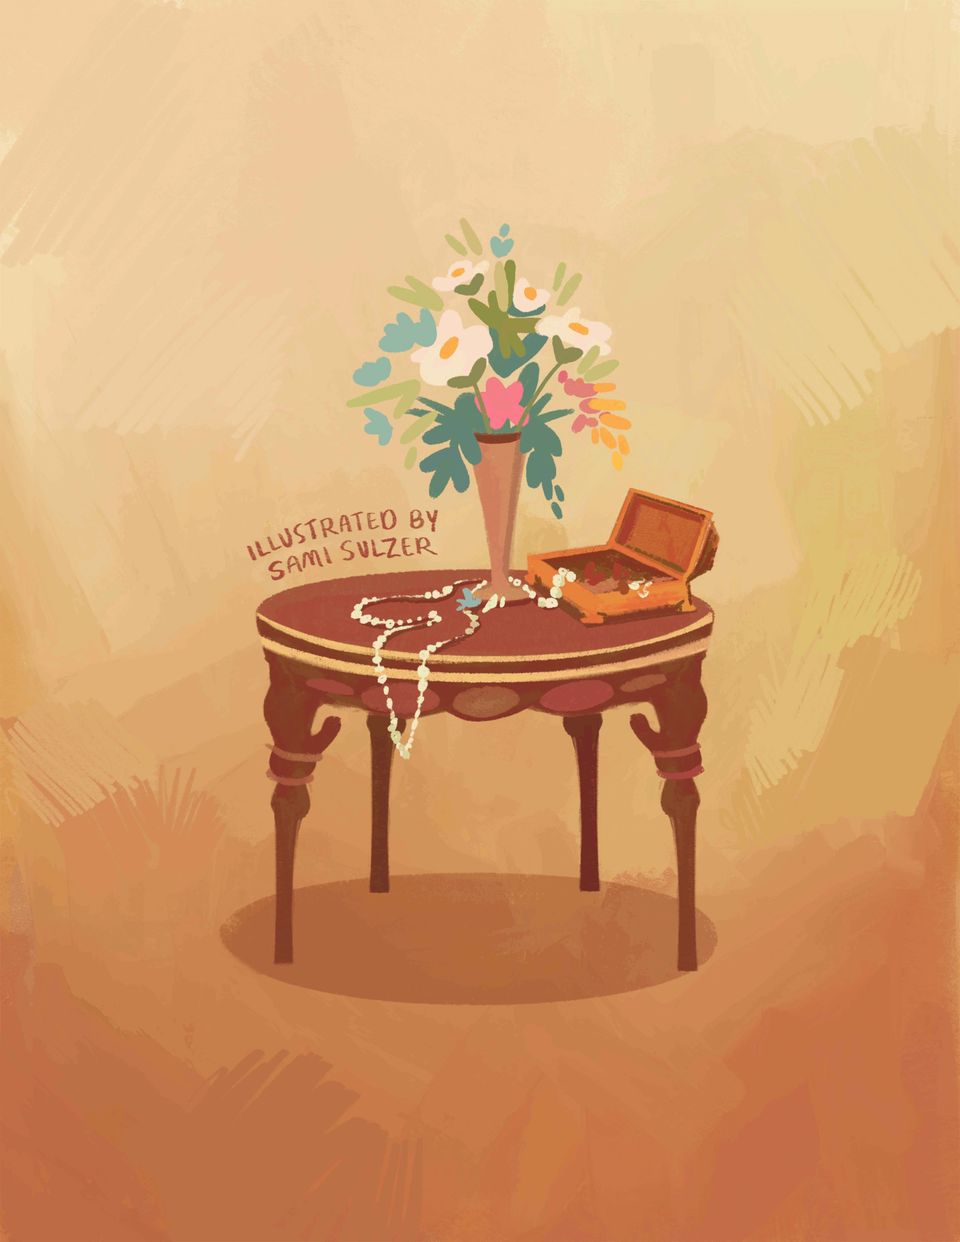 A wooden table, with a jewelry box and vase, sits on a brown background. Text reads: "Illustrated by Sami Sulzer."